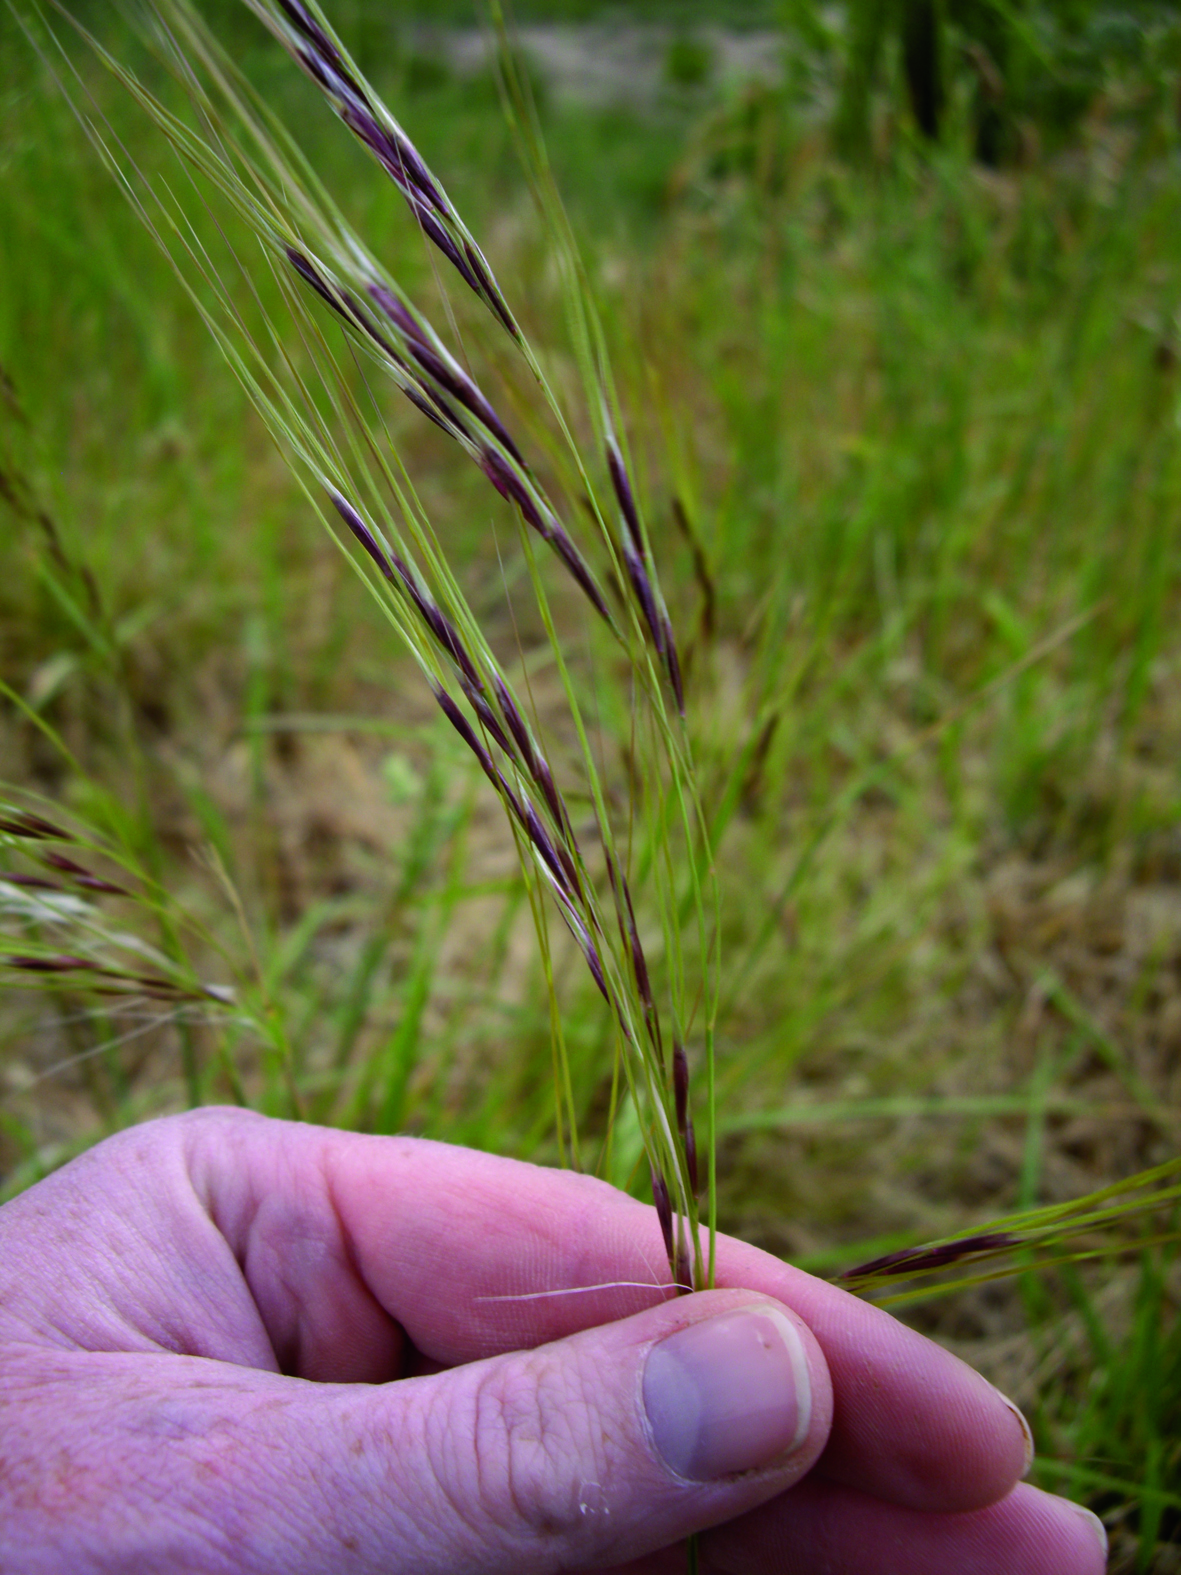 Stay alert for Chilean Needle Grass | News & Media | Hawke's Bay ...